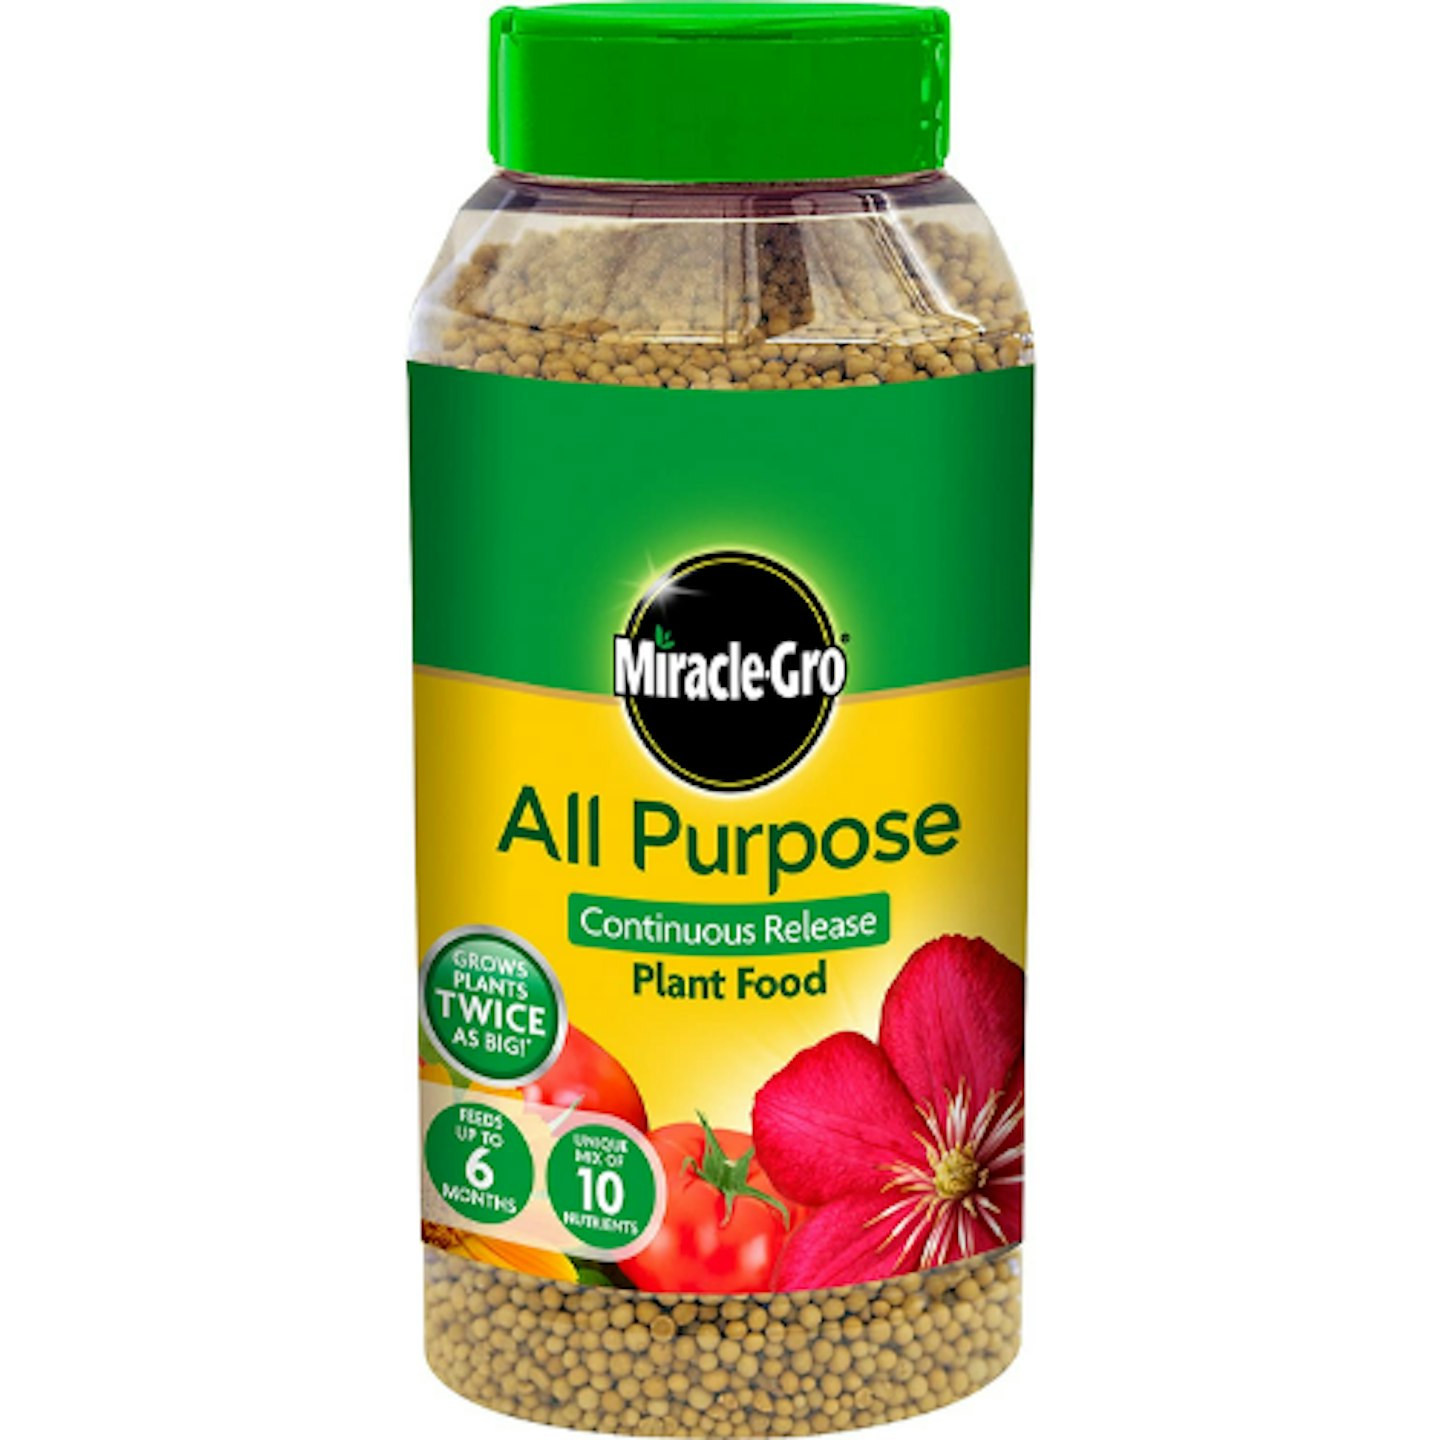 Miracle-Gro 17684 All Purpose Continuous Release Plant Food, 1kg